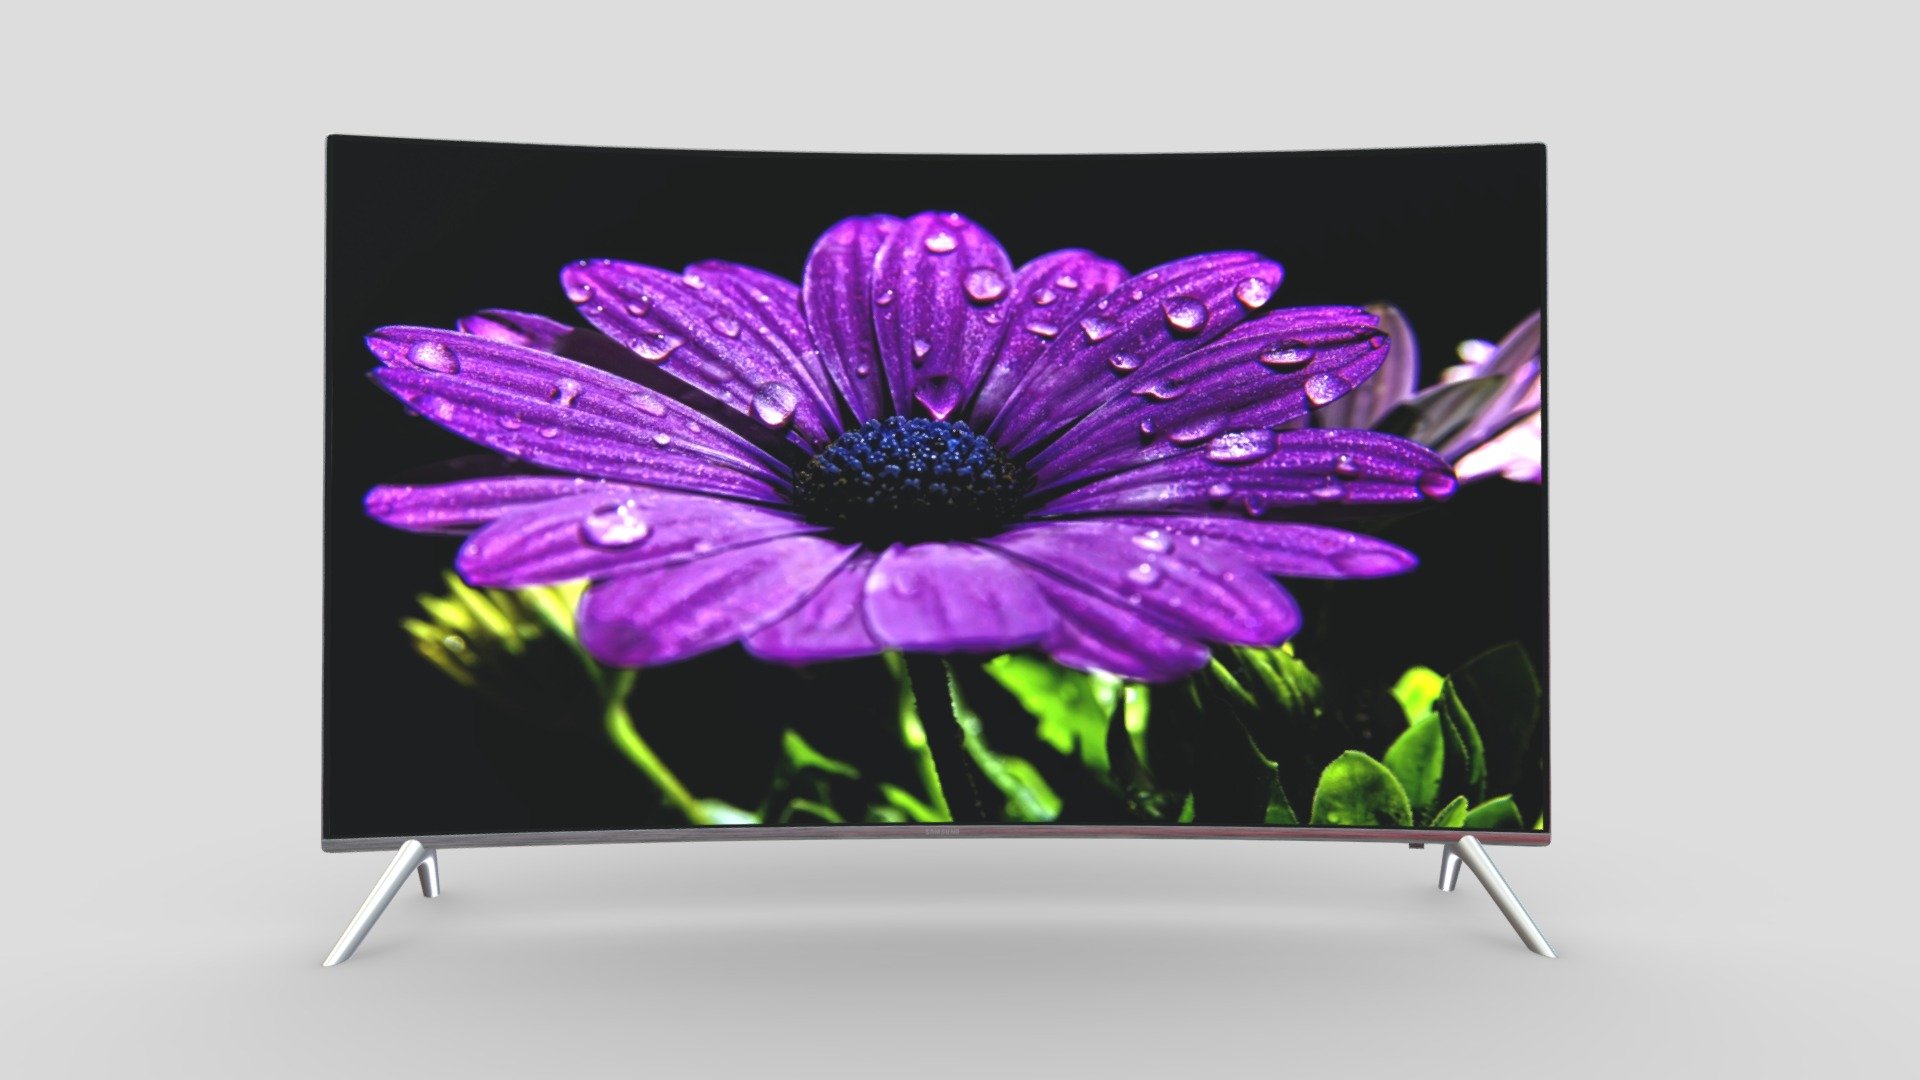 Hi, I'm Frezzy. I am leader of Cgivn studio. We are a team of talented artists working together since 2013.
If you want hire me to do 3d model please touch me at:cgivn.studio Thanks you! - Samsung KS7500 SUHD 4K TV Curved - Buy Royalty Free 3D model by Frezzy3D 3d model